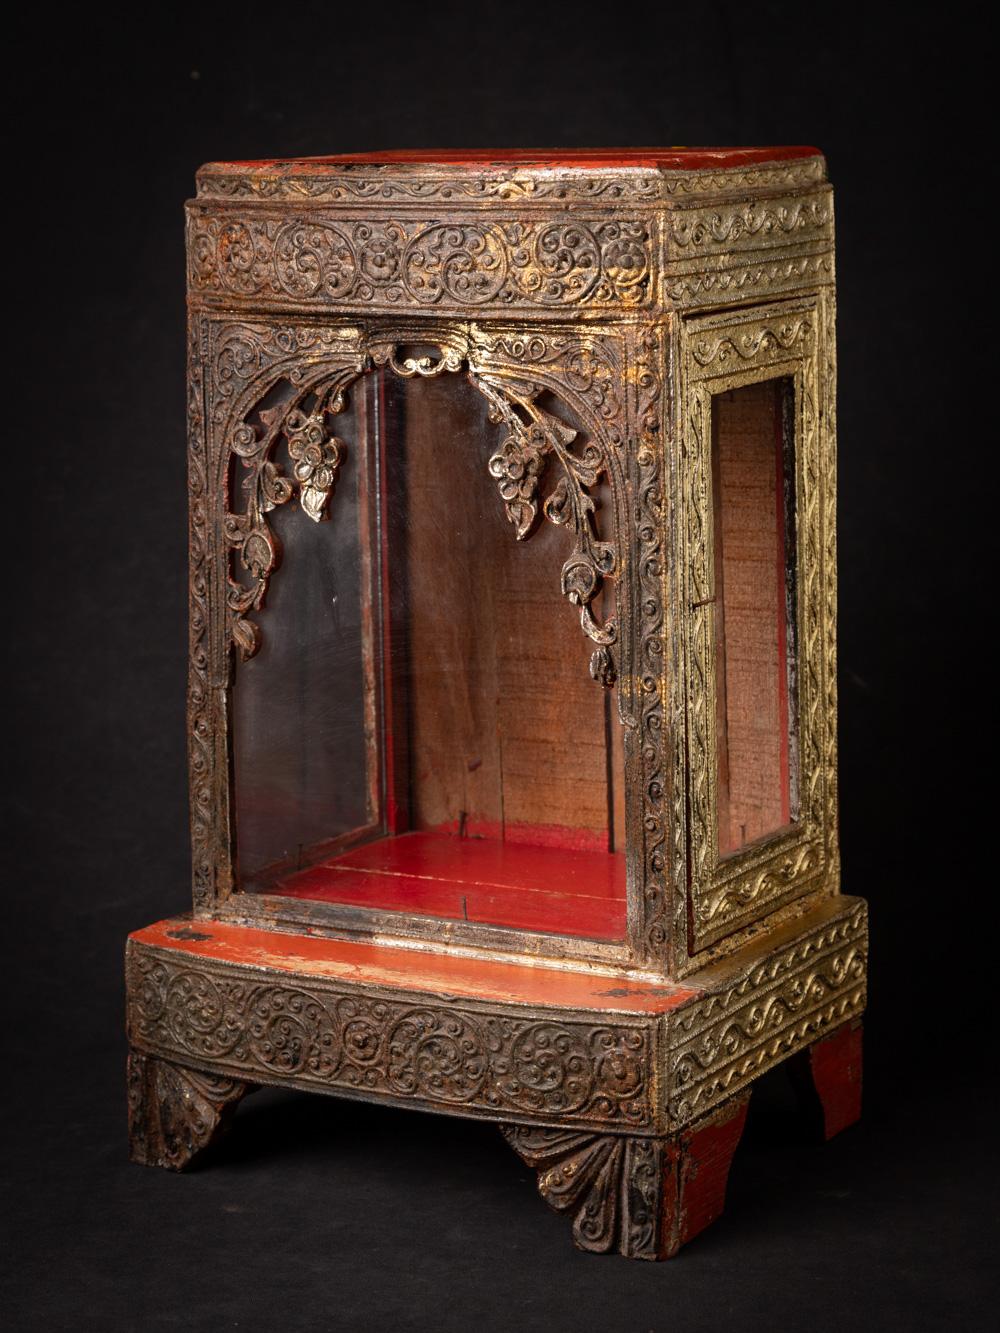 This Late 19th-century wooden Burmese Buddha temple is a stunning testament to the rich spiritual and artistic heritage of Burma. Crafted from wood and standing at a height of 42.2 cm, with dimensions of 26.3 cm in width and 20.8 cm in depth, it